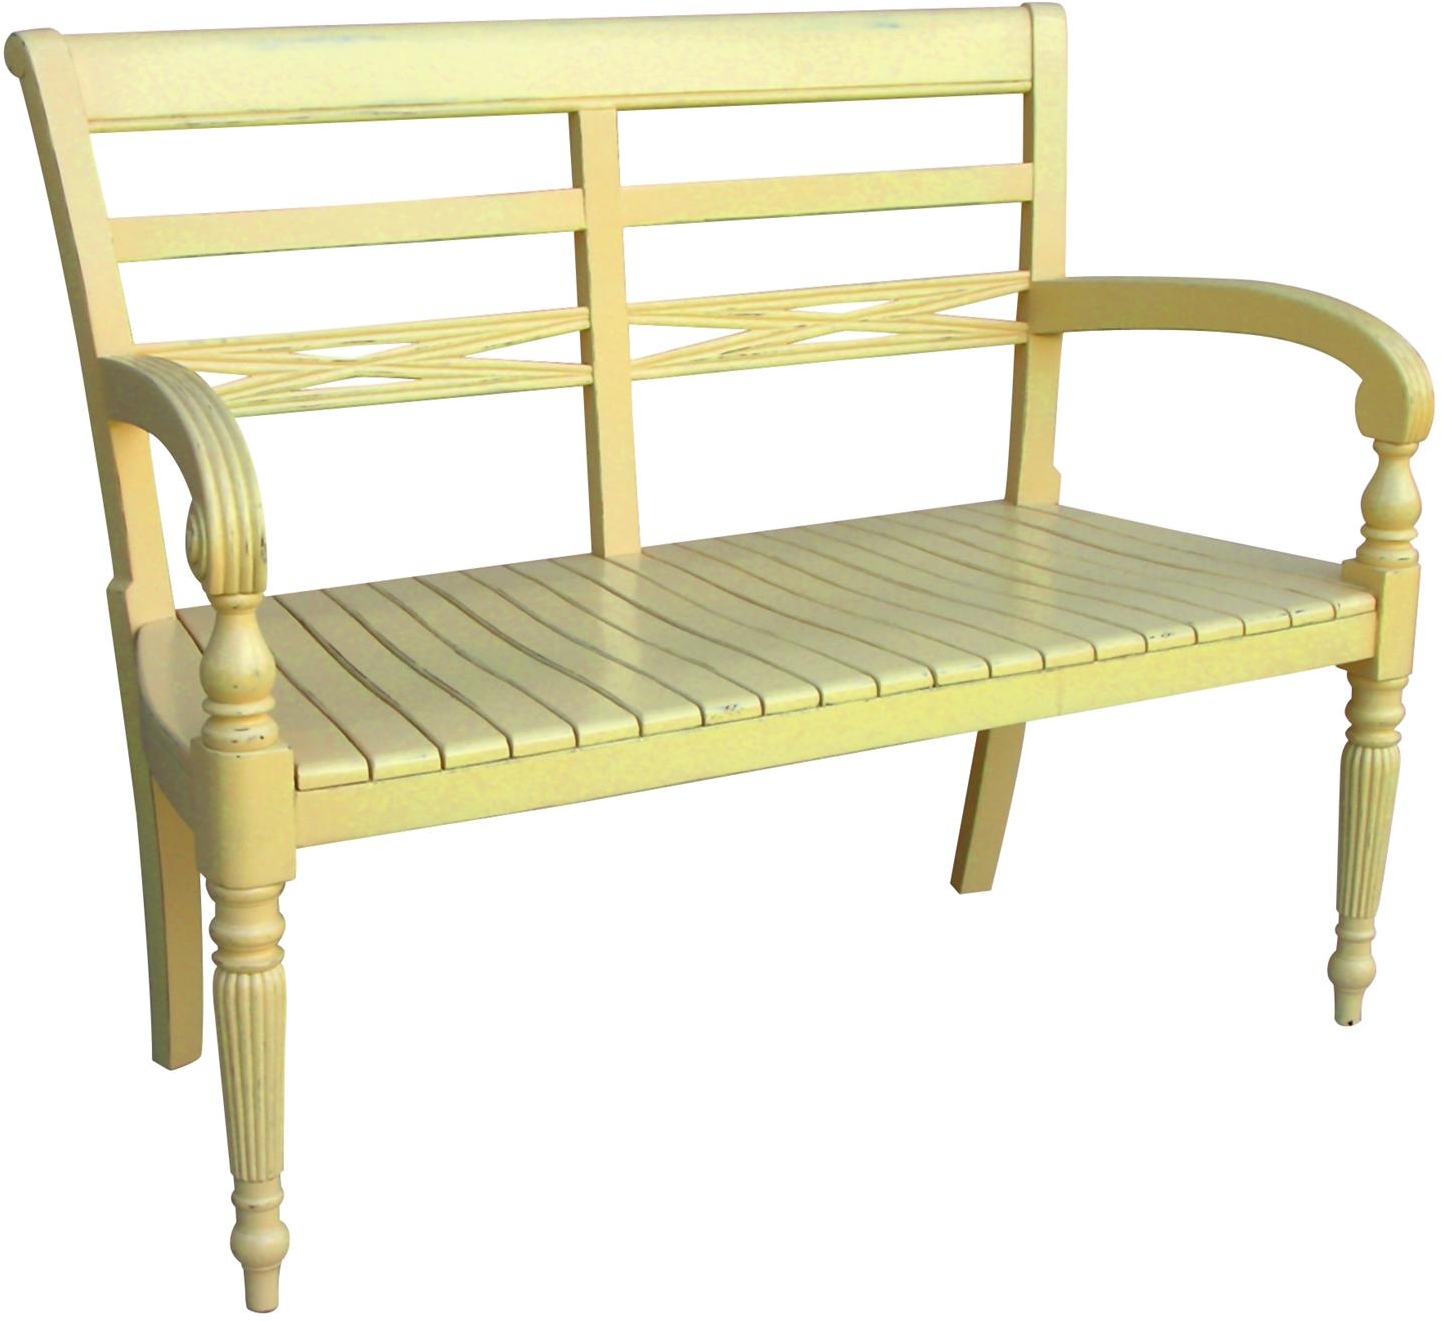 Bench TRADE WINDS RAFFLES Traditional Antique Seats 2 Yellow Painted Mahogany-Image 1